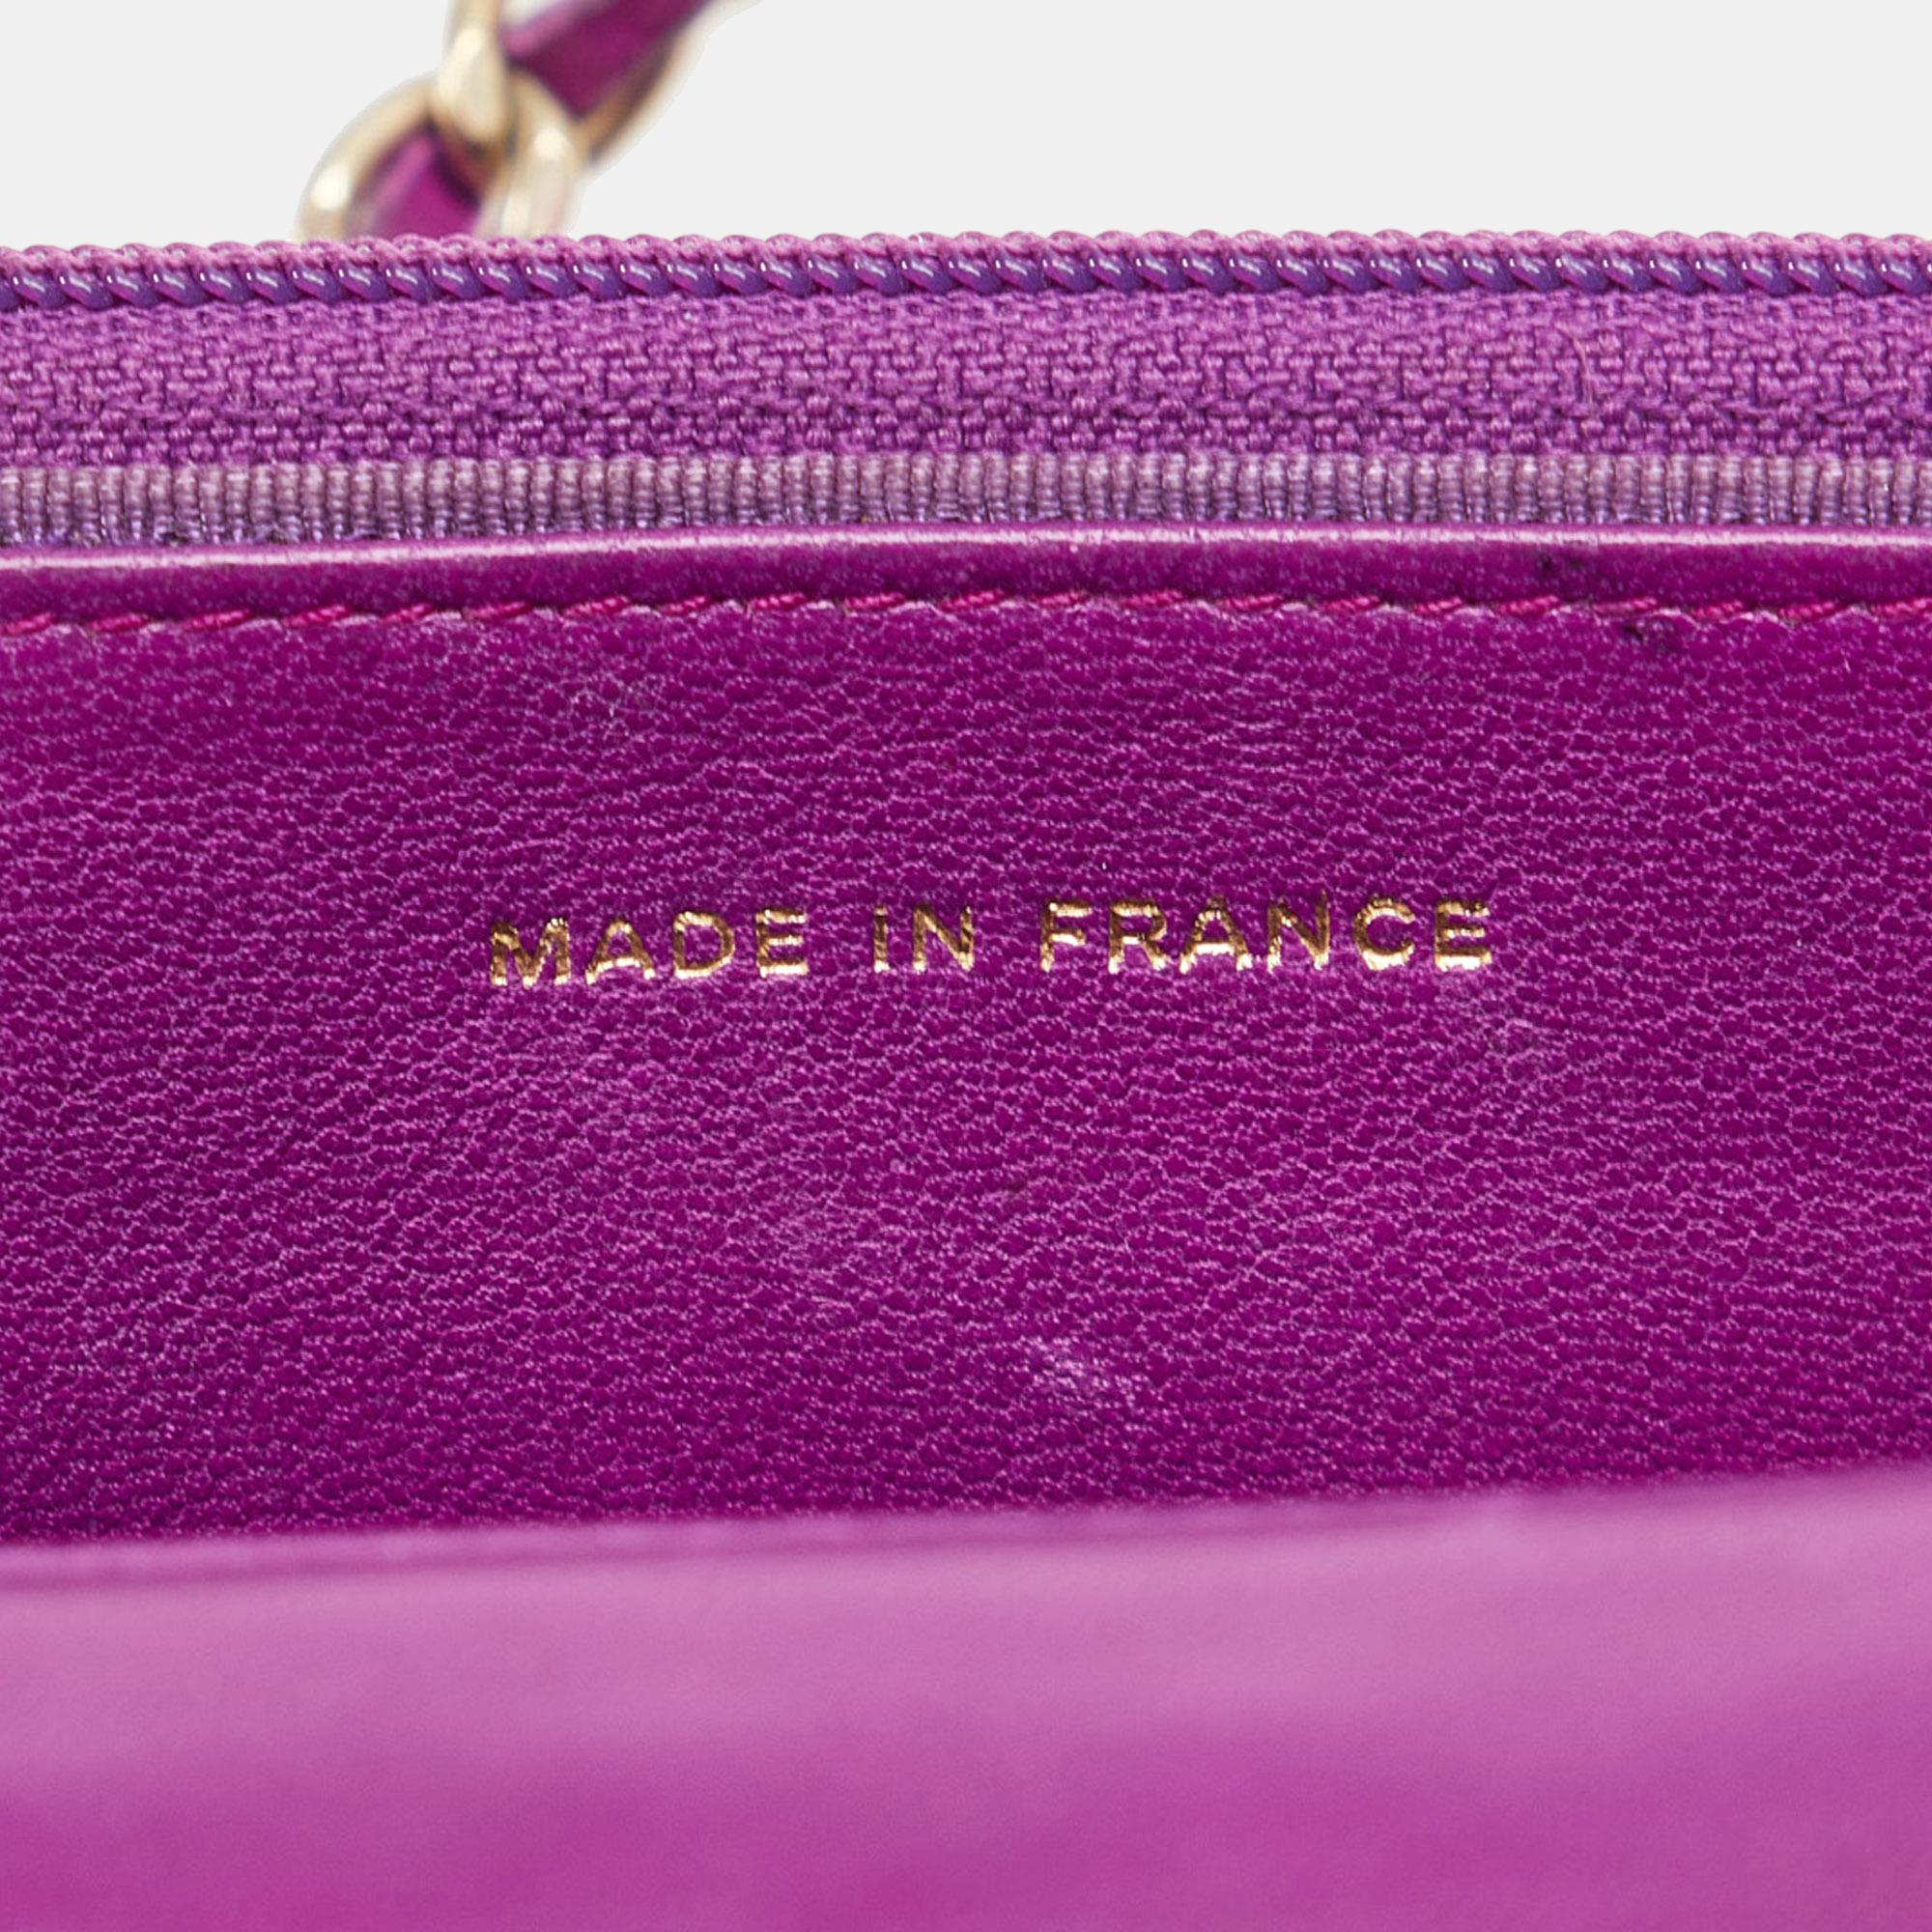 Chanel Purple Camellia Wallet On Chain